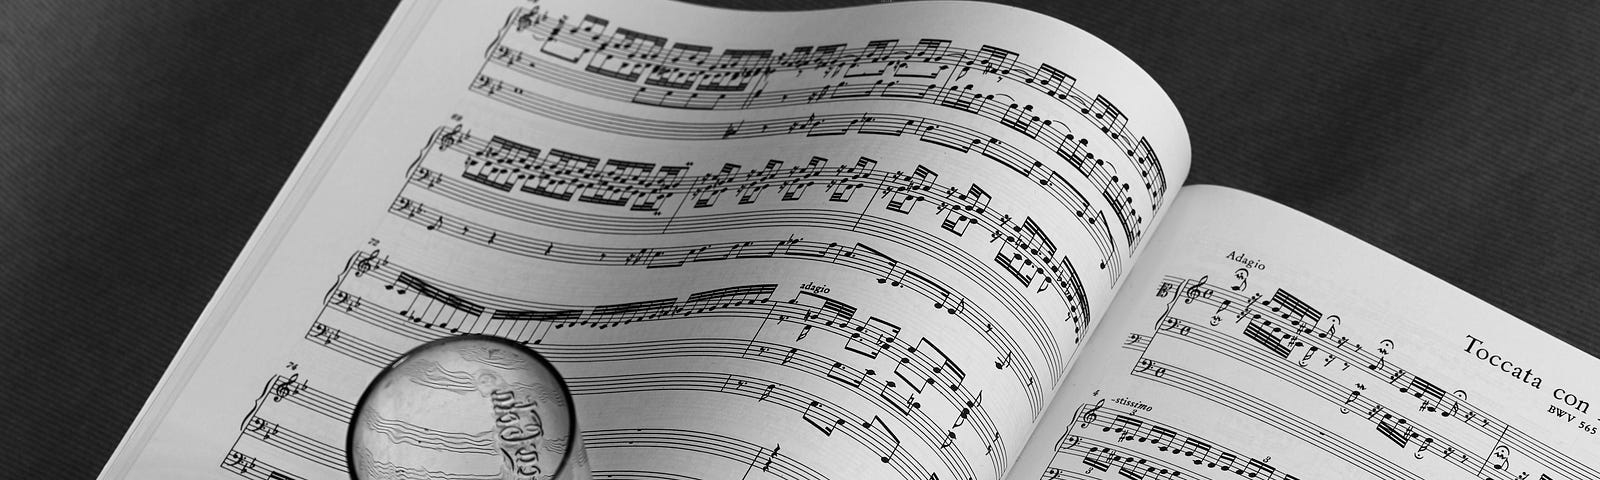 A book of sheet music opened with a pencil on the right page. An empty glass positioned beneath the left sheet.